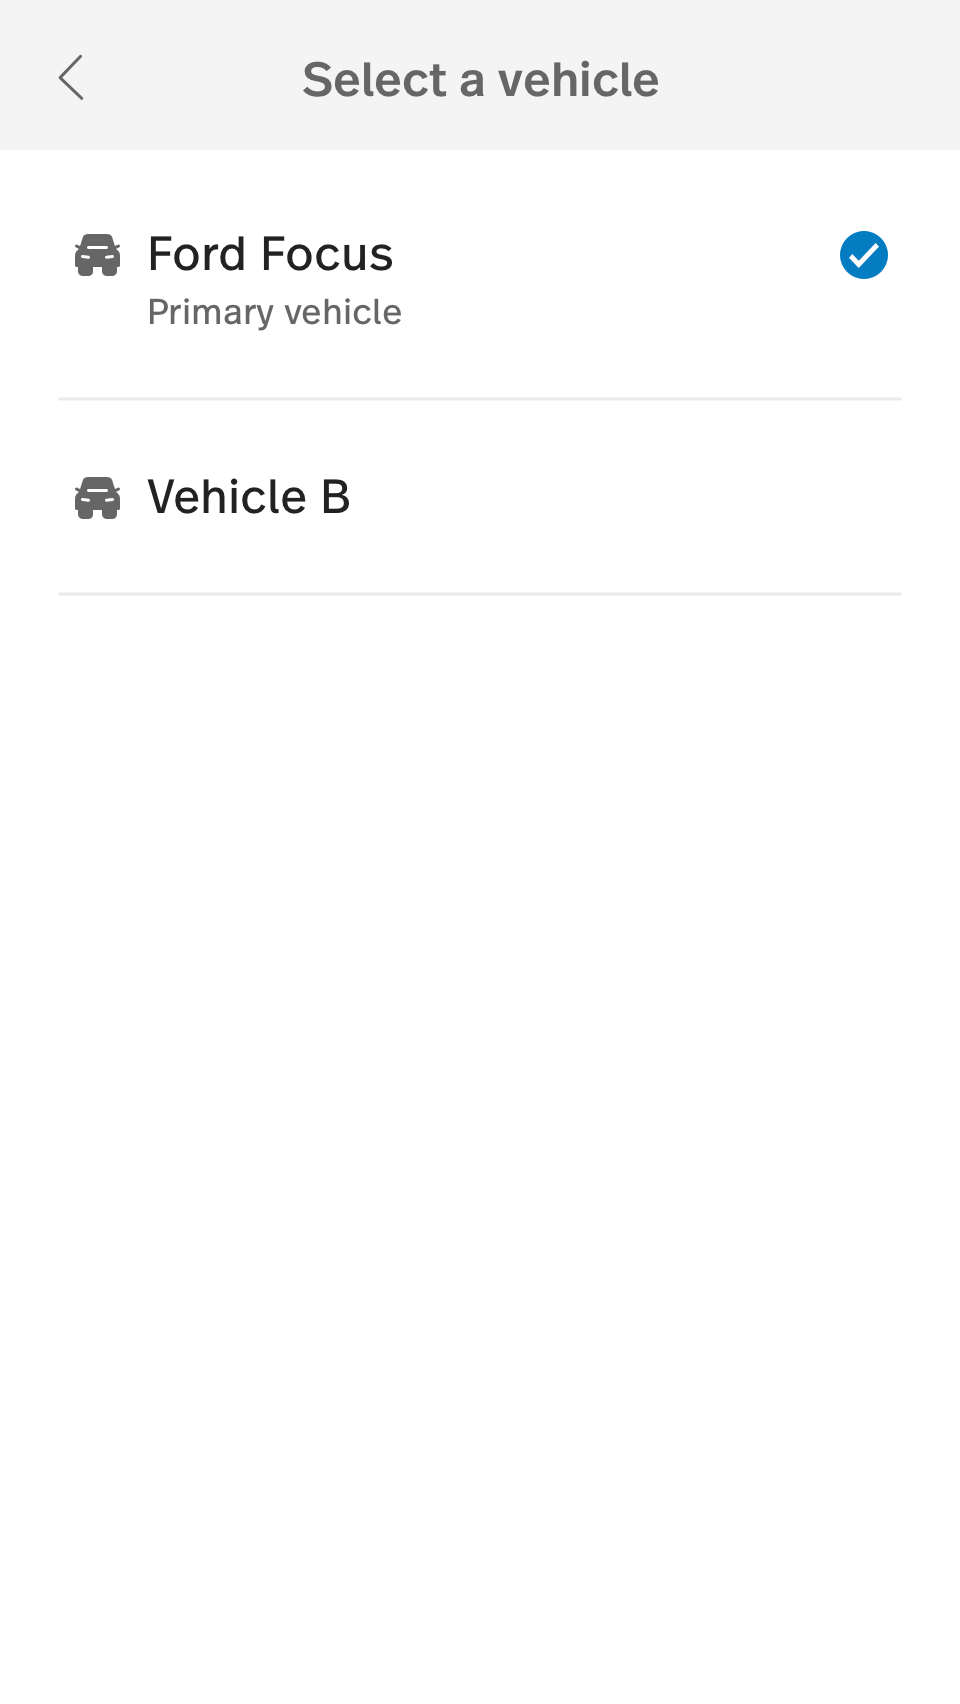 This image shows the vehicle list.